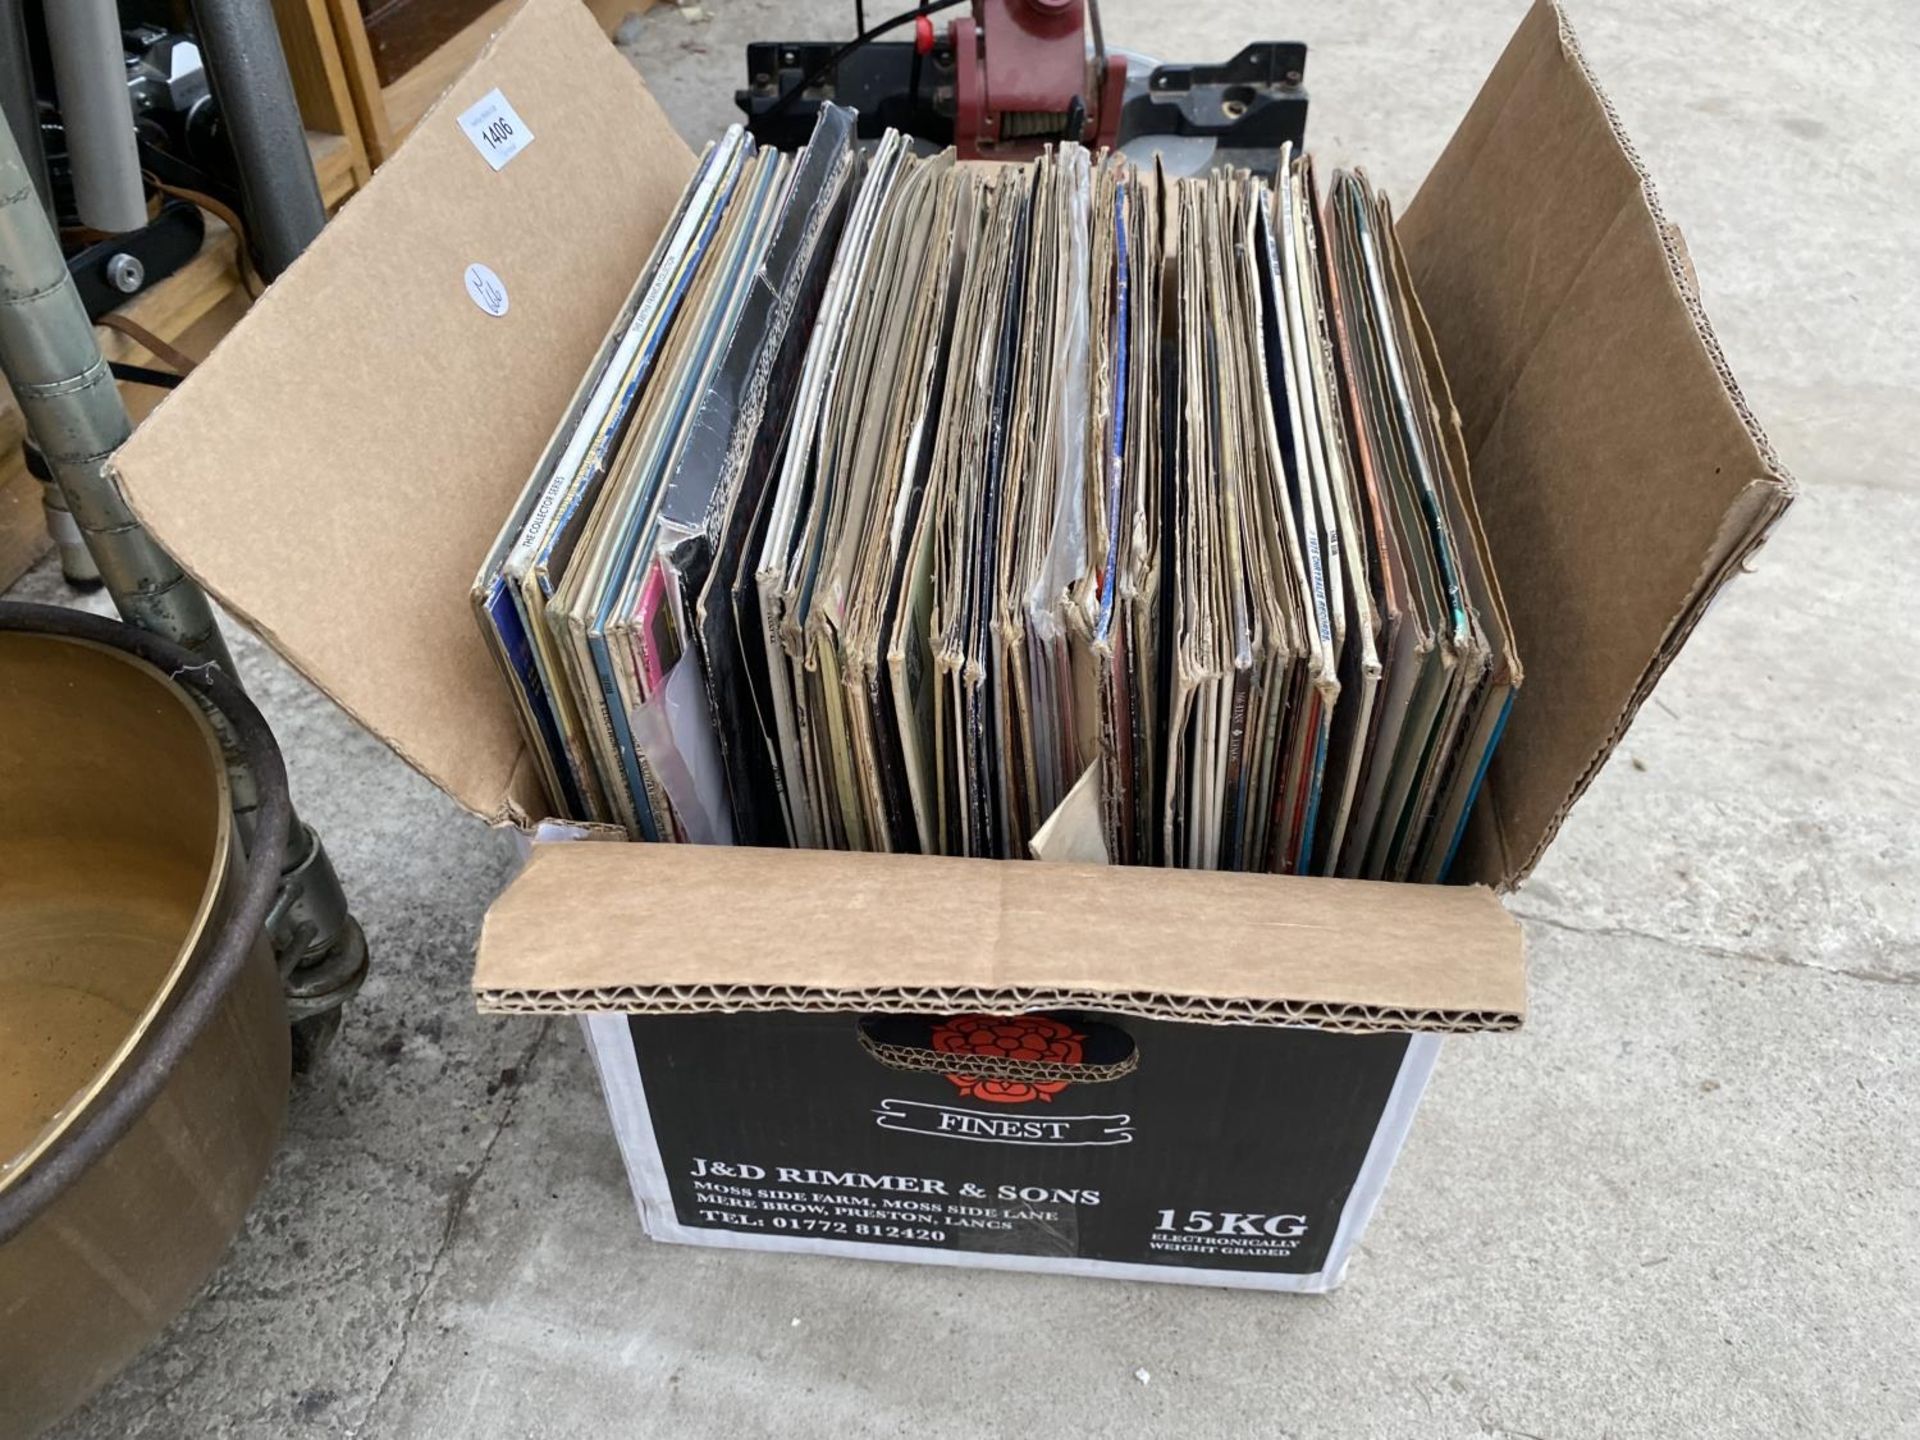 A LARGE QUANTITY OF VINTAGE LP RECORDS - Image 2 of 2